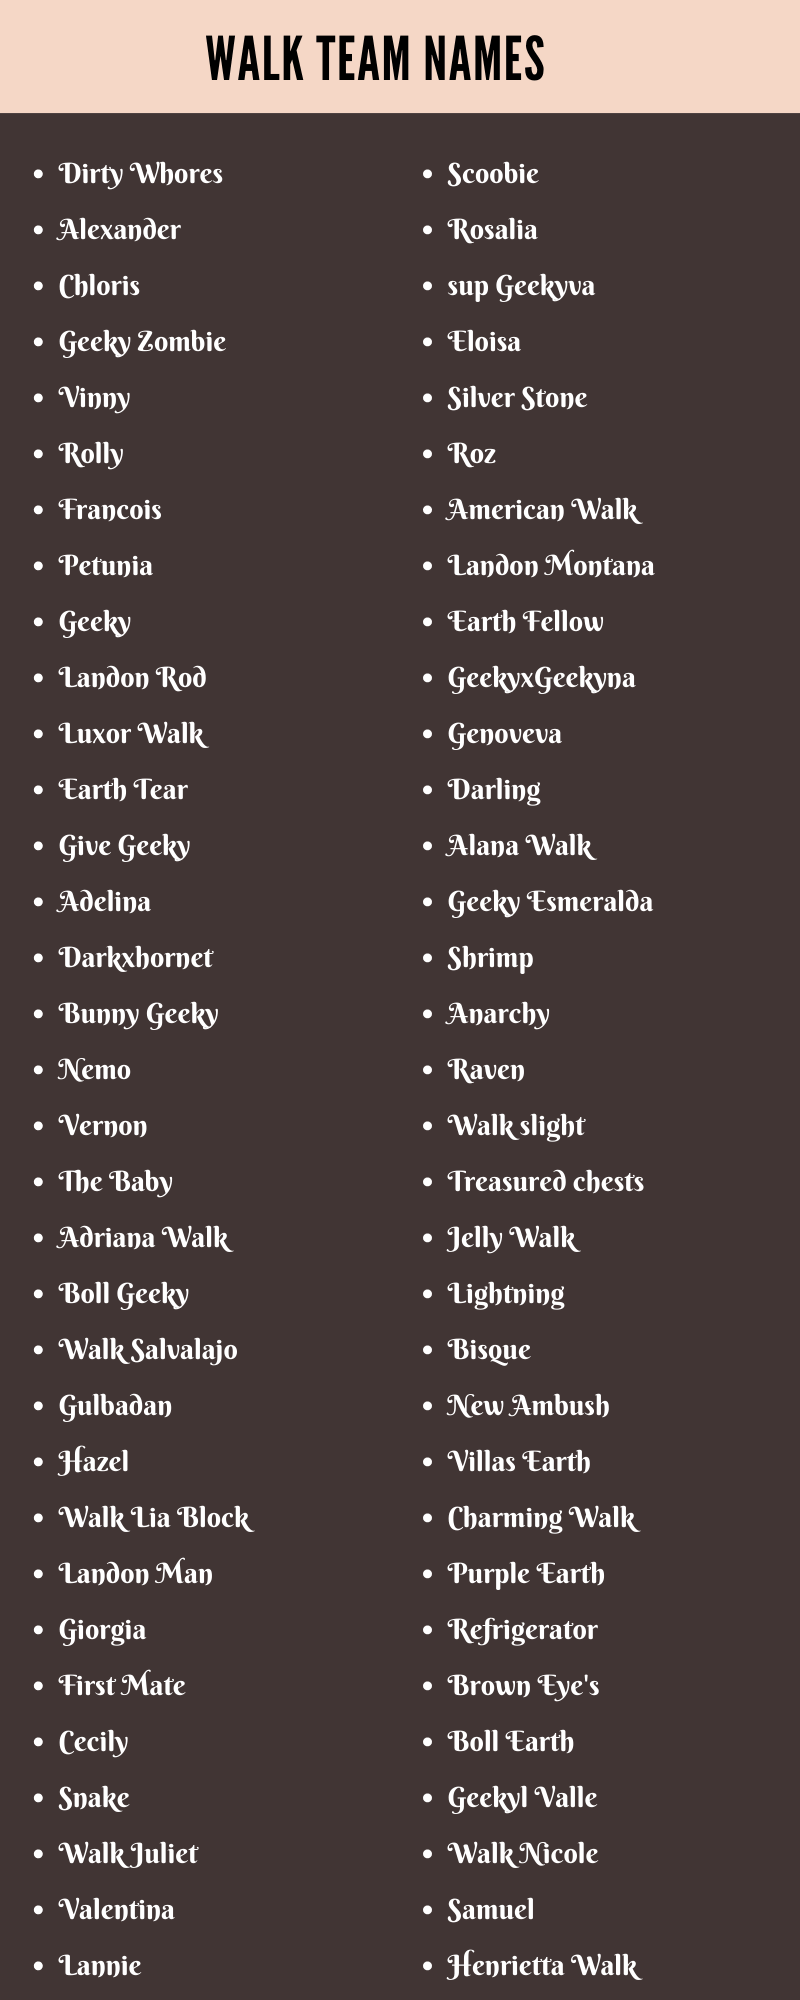 750 Cool Walk Team Names Ideas and Suggestions